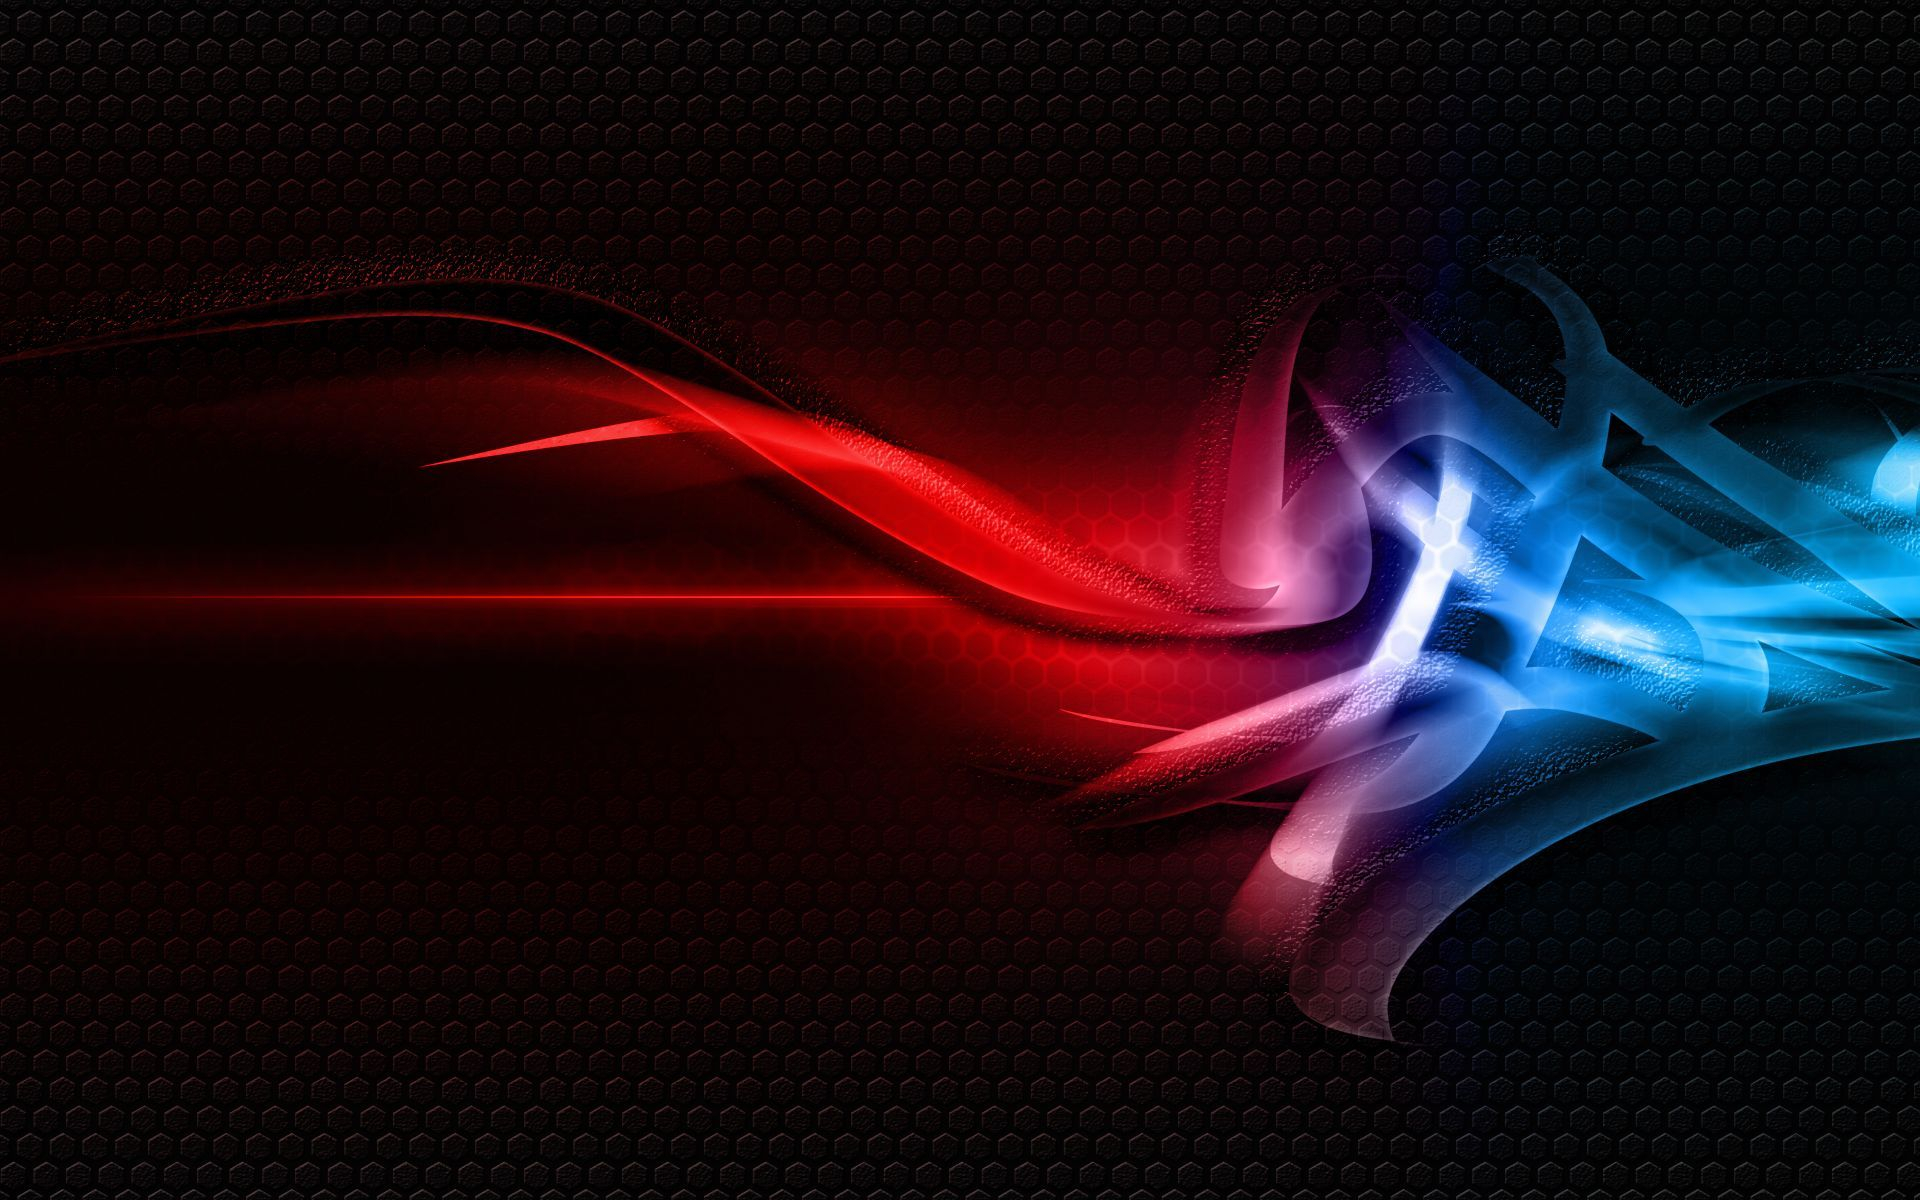 1920x1200 Red and Blue Abstract Wallpapers Top Free Red and Blue Abstract Backgrounds